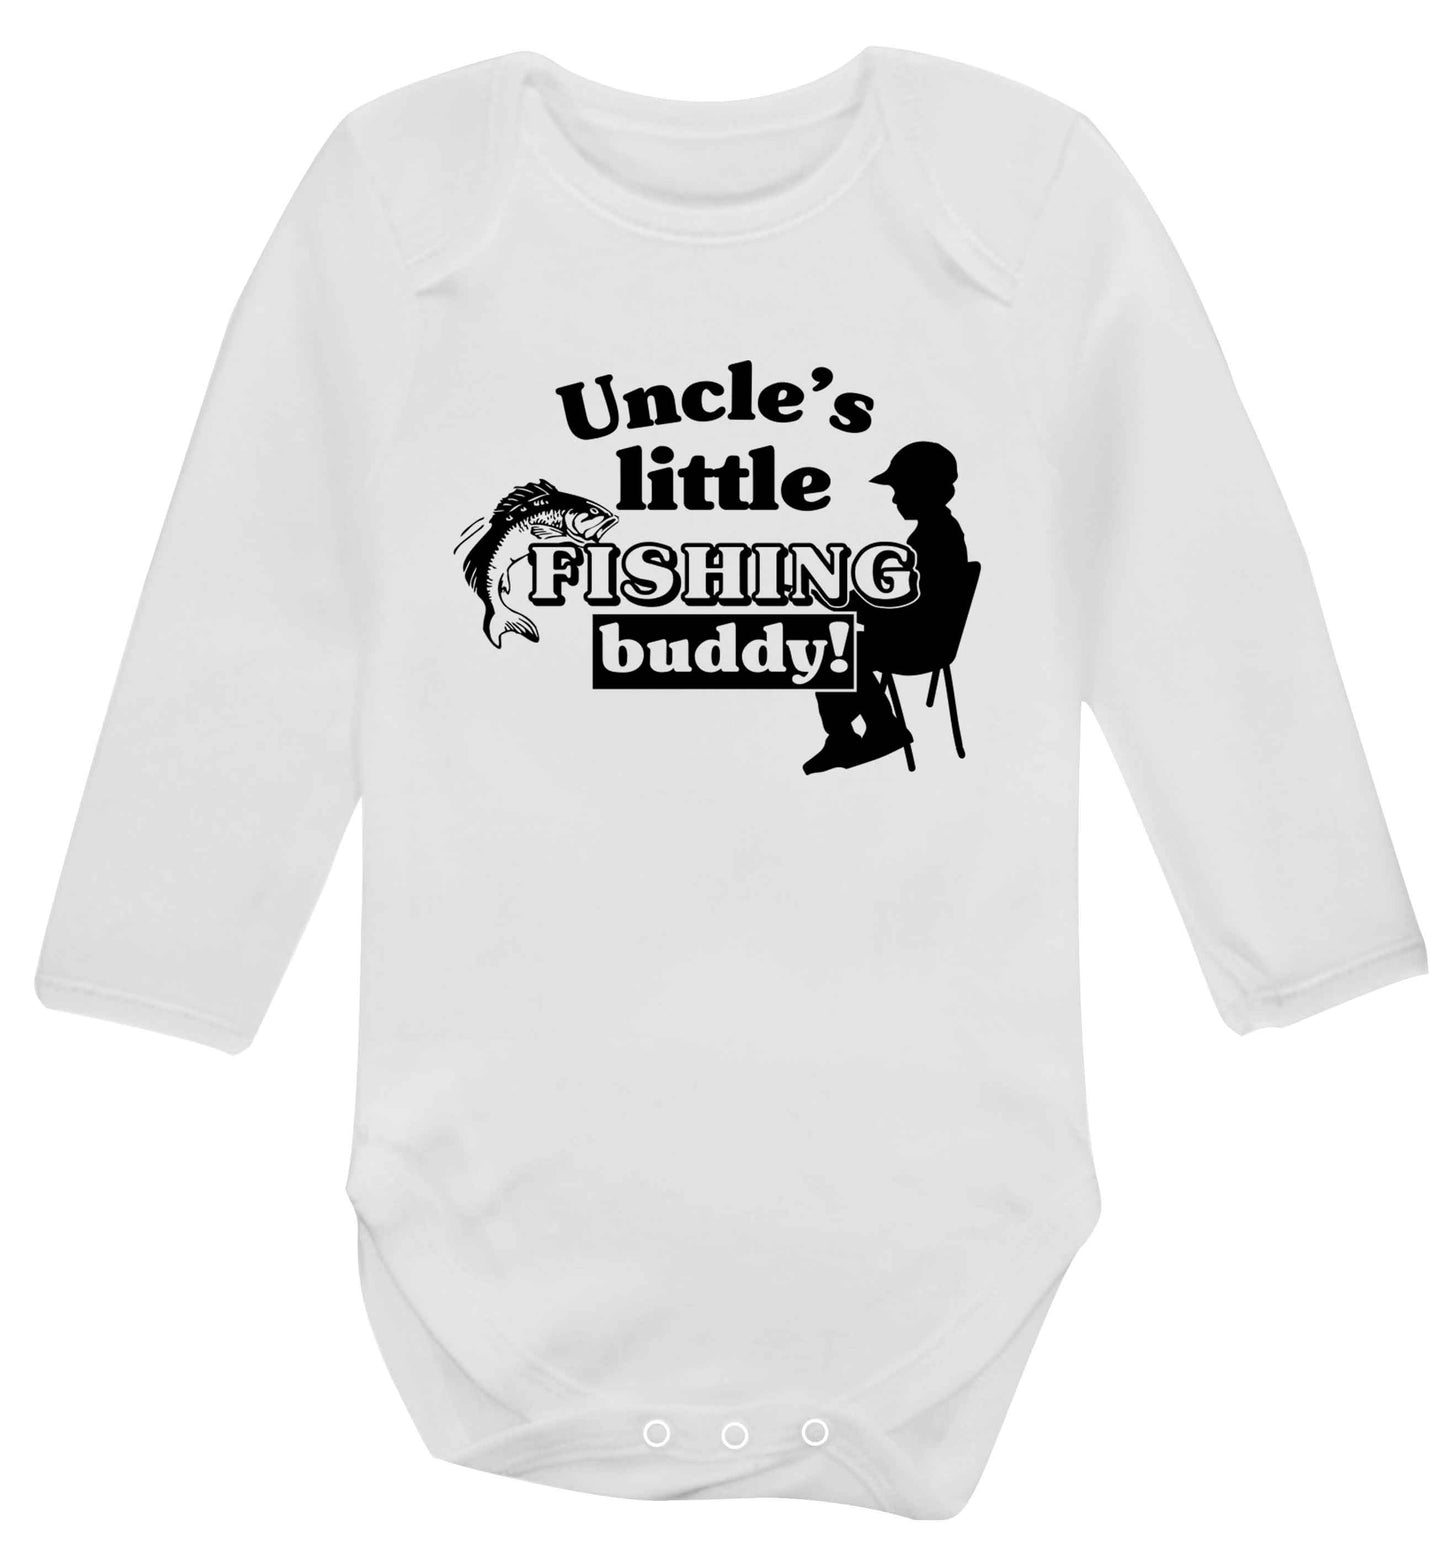 Uncle's little fishing buddy Baby Vest long sleeved white 6-12 months